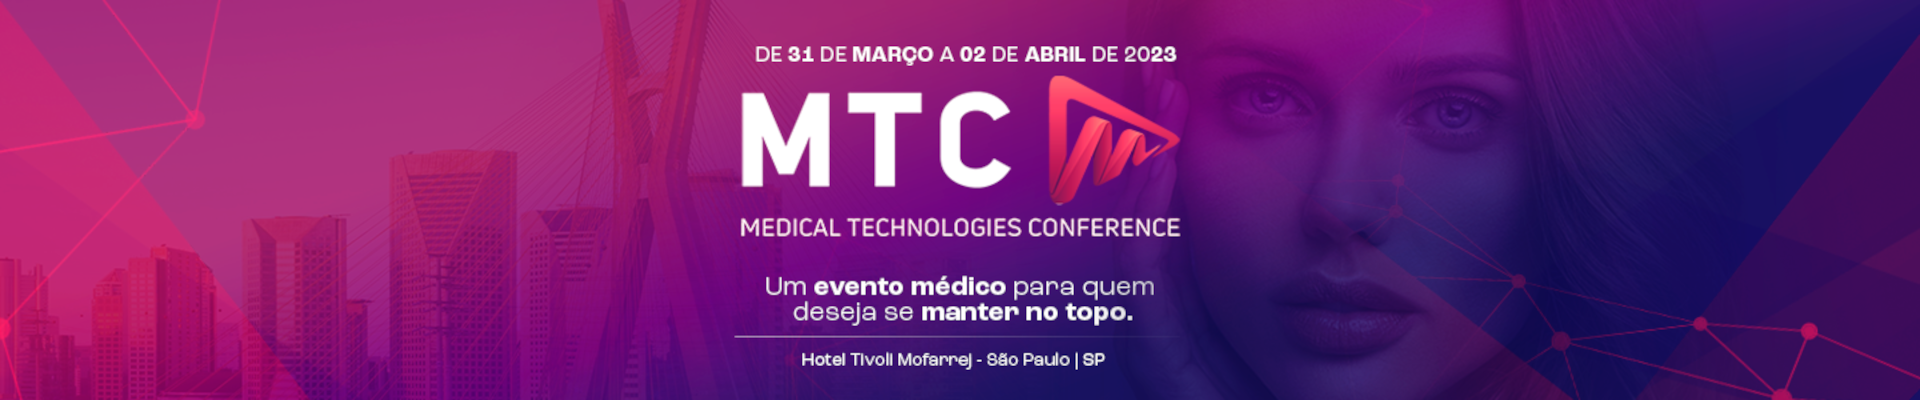 MTC 2023 (Medical Technologies Conference)